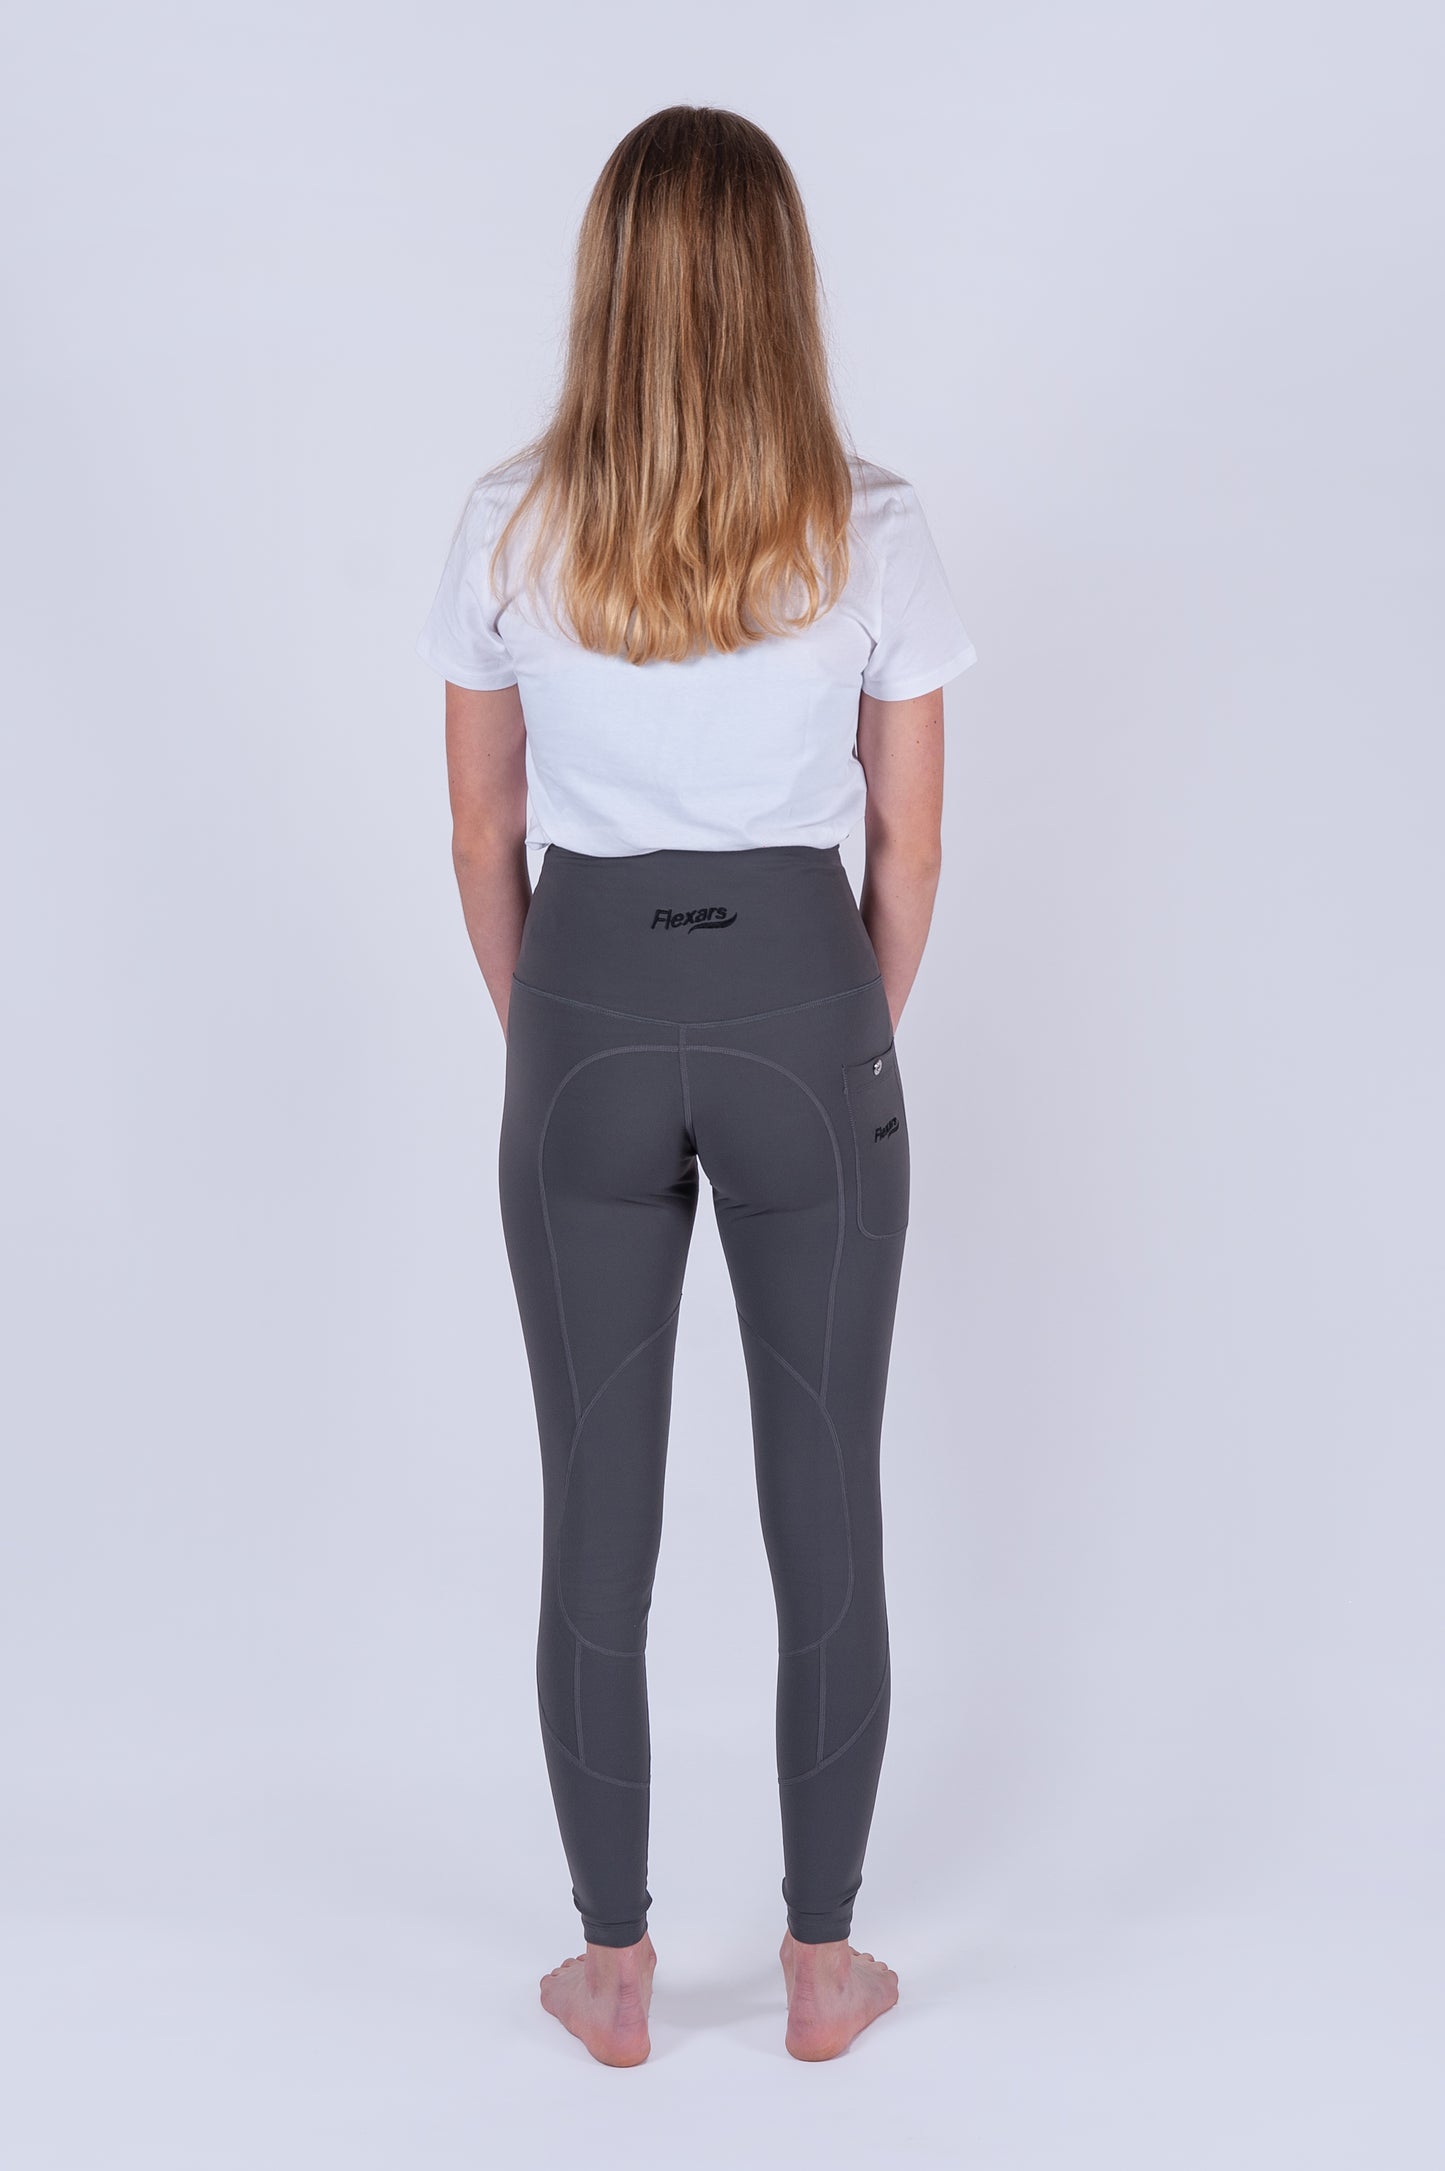 horse riding leggings with phone pocket